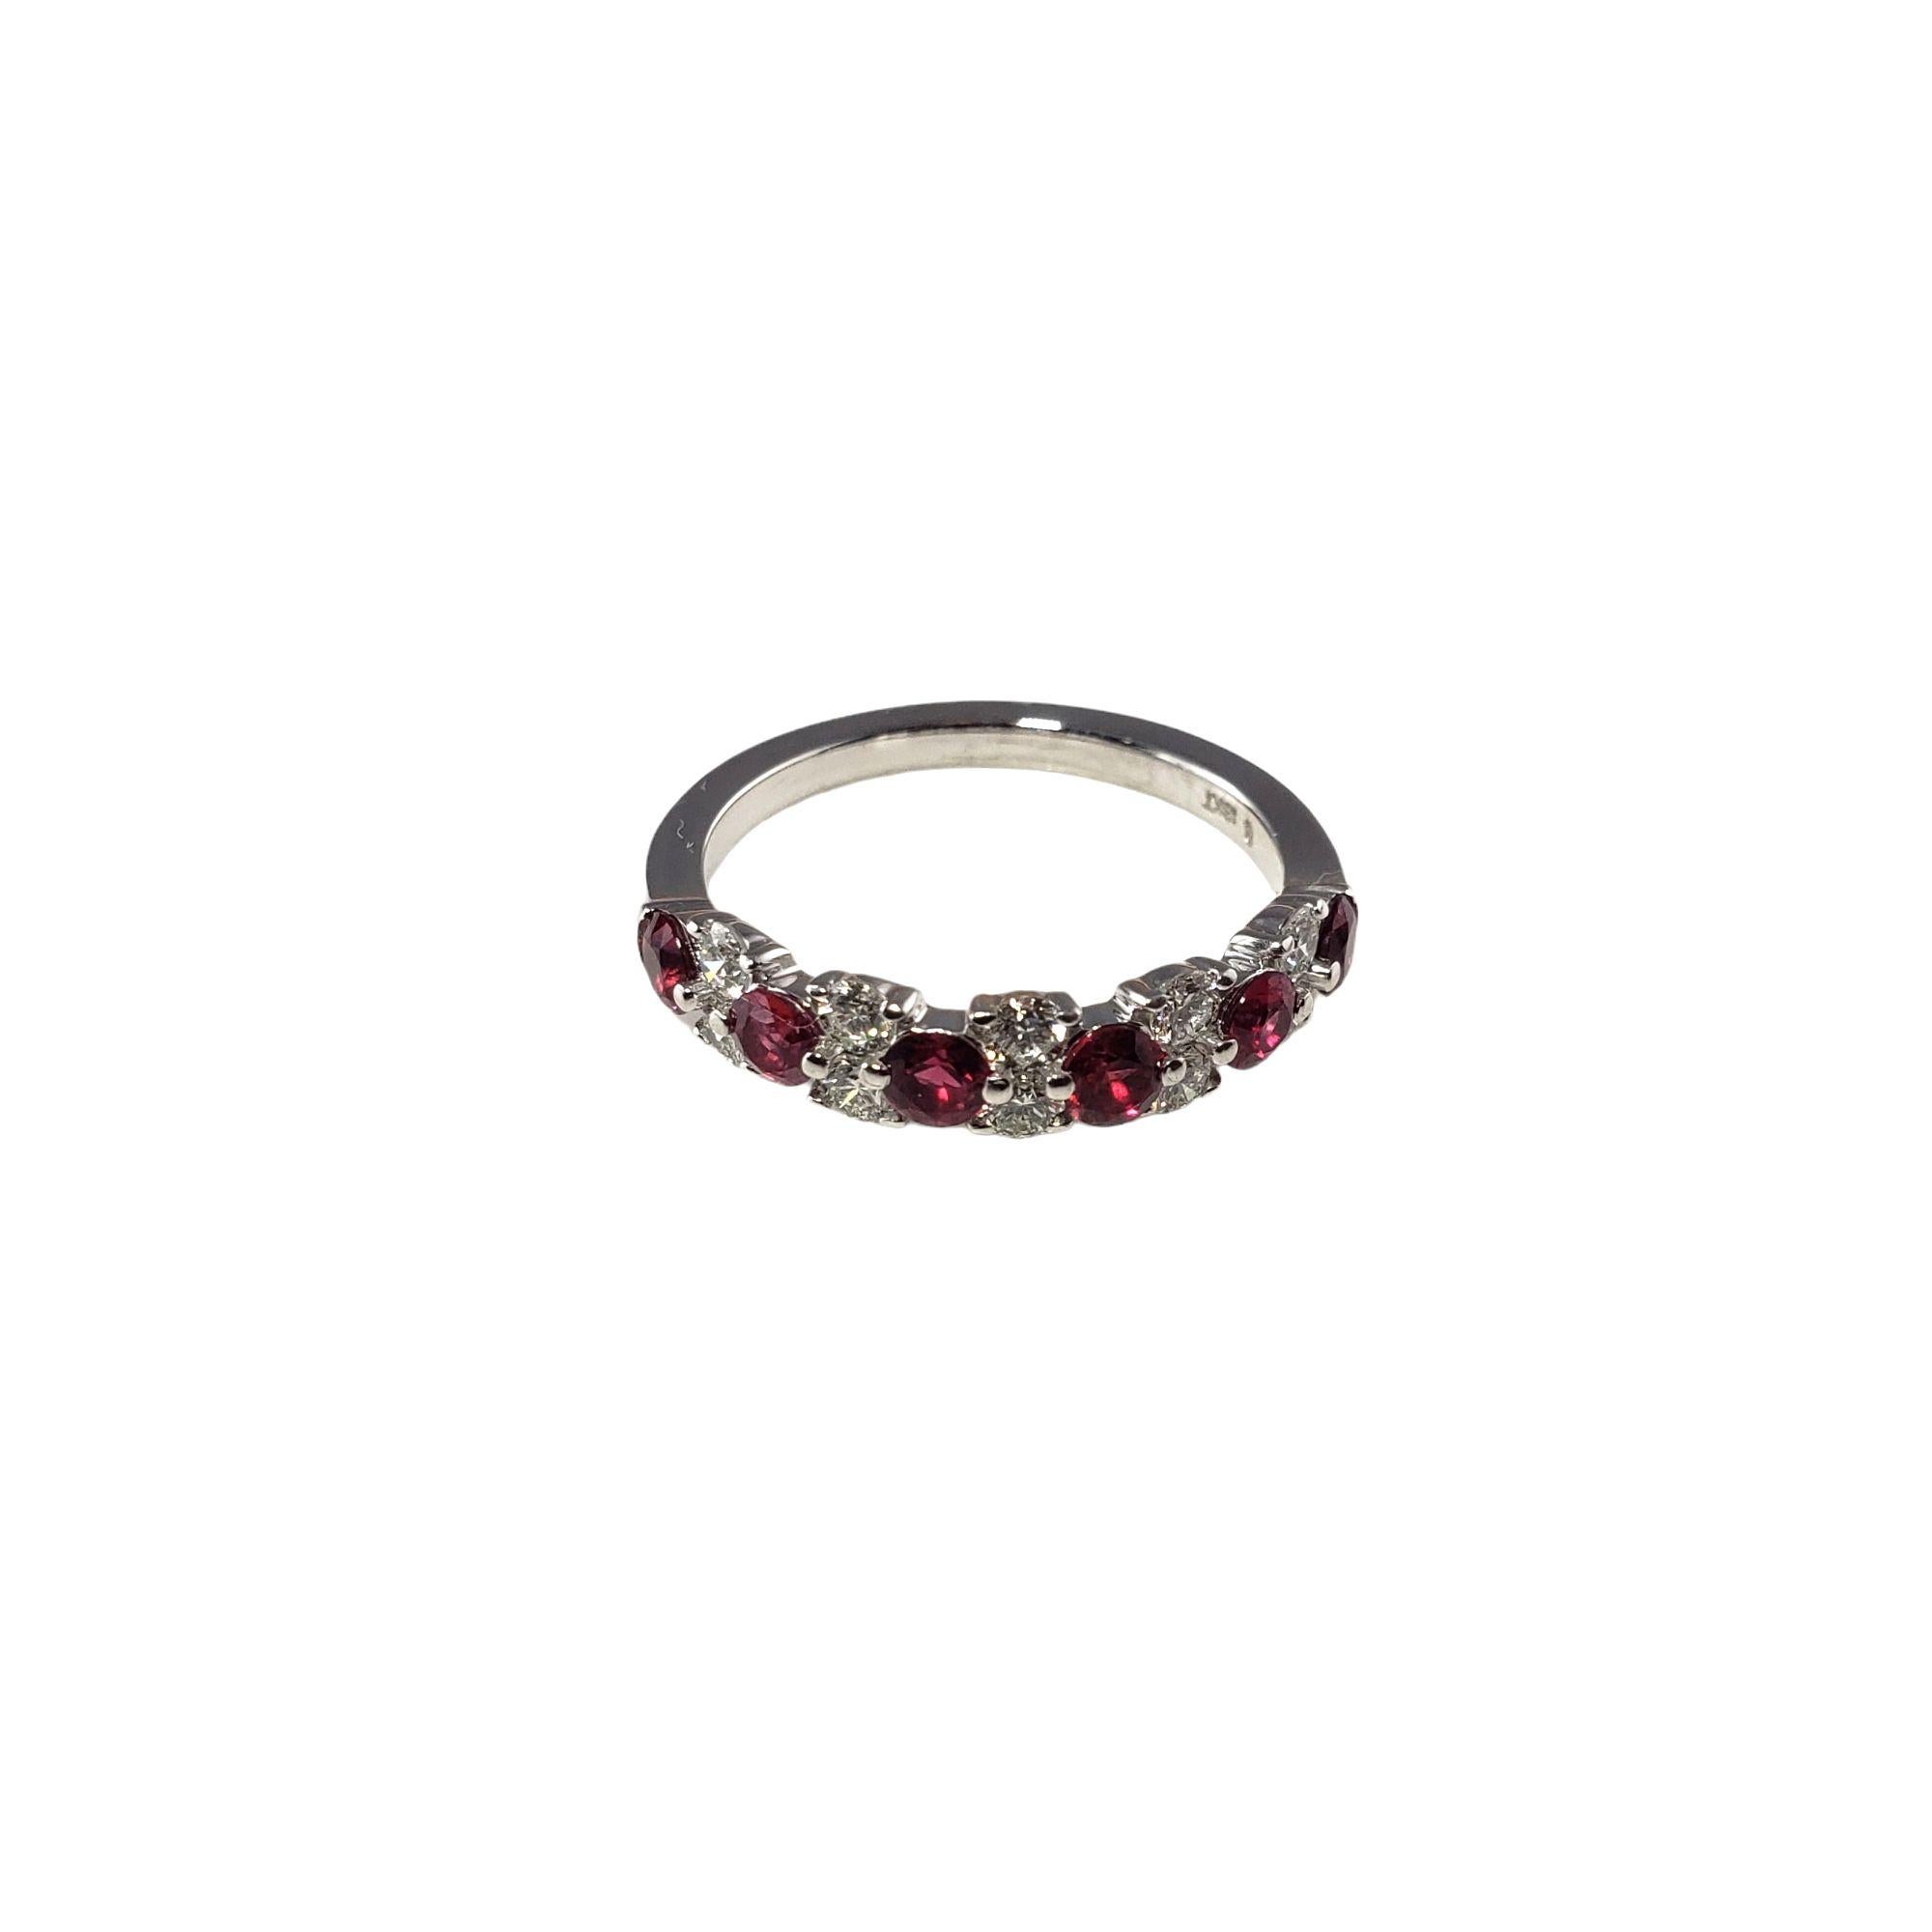 Vintage 18 Karat White Gold Ruby and Diamond Ring Size 6 JAGi Certified-

This lovely ring features six round cut natural rubies and ten round brilliant cut diamonds set in classic 18K white gold.  Width:  4 mm.

Shank:  2 mm.

Total diamond weight: